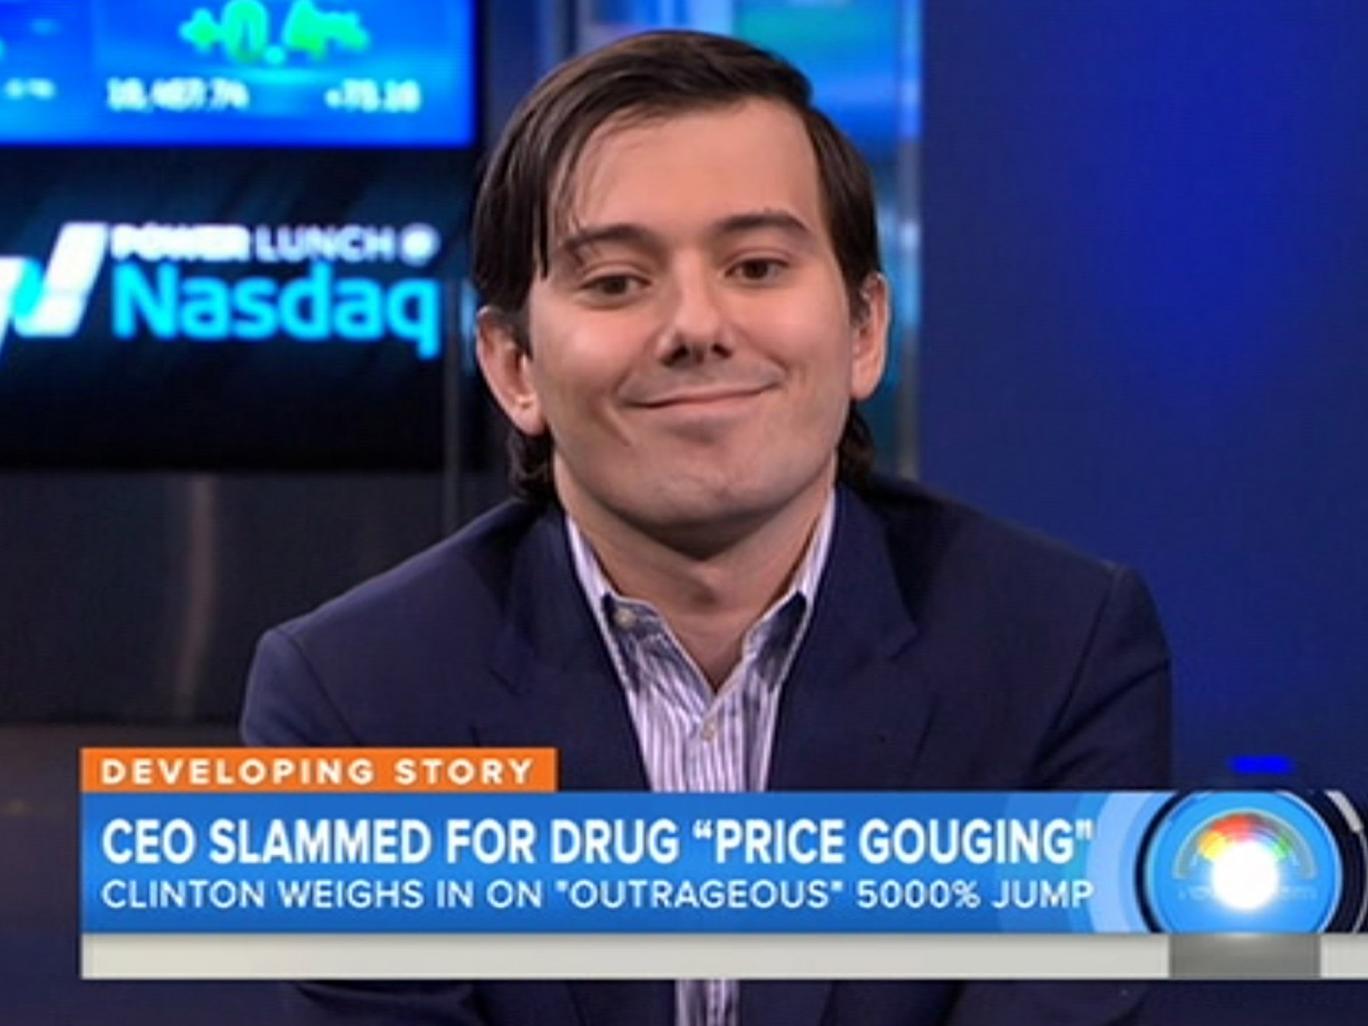 Martin Shkreli became a meme in 2015 when his company bought a license for a drug and raised its price from $13.5 to $750 per pill. Img from Media Ite.